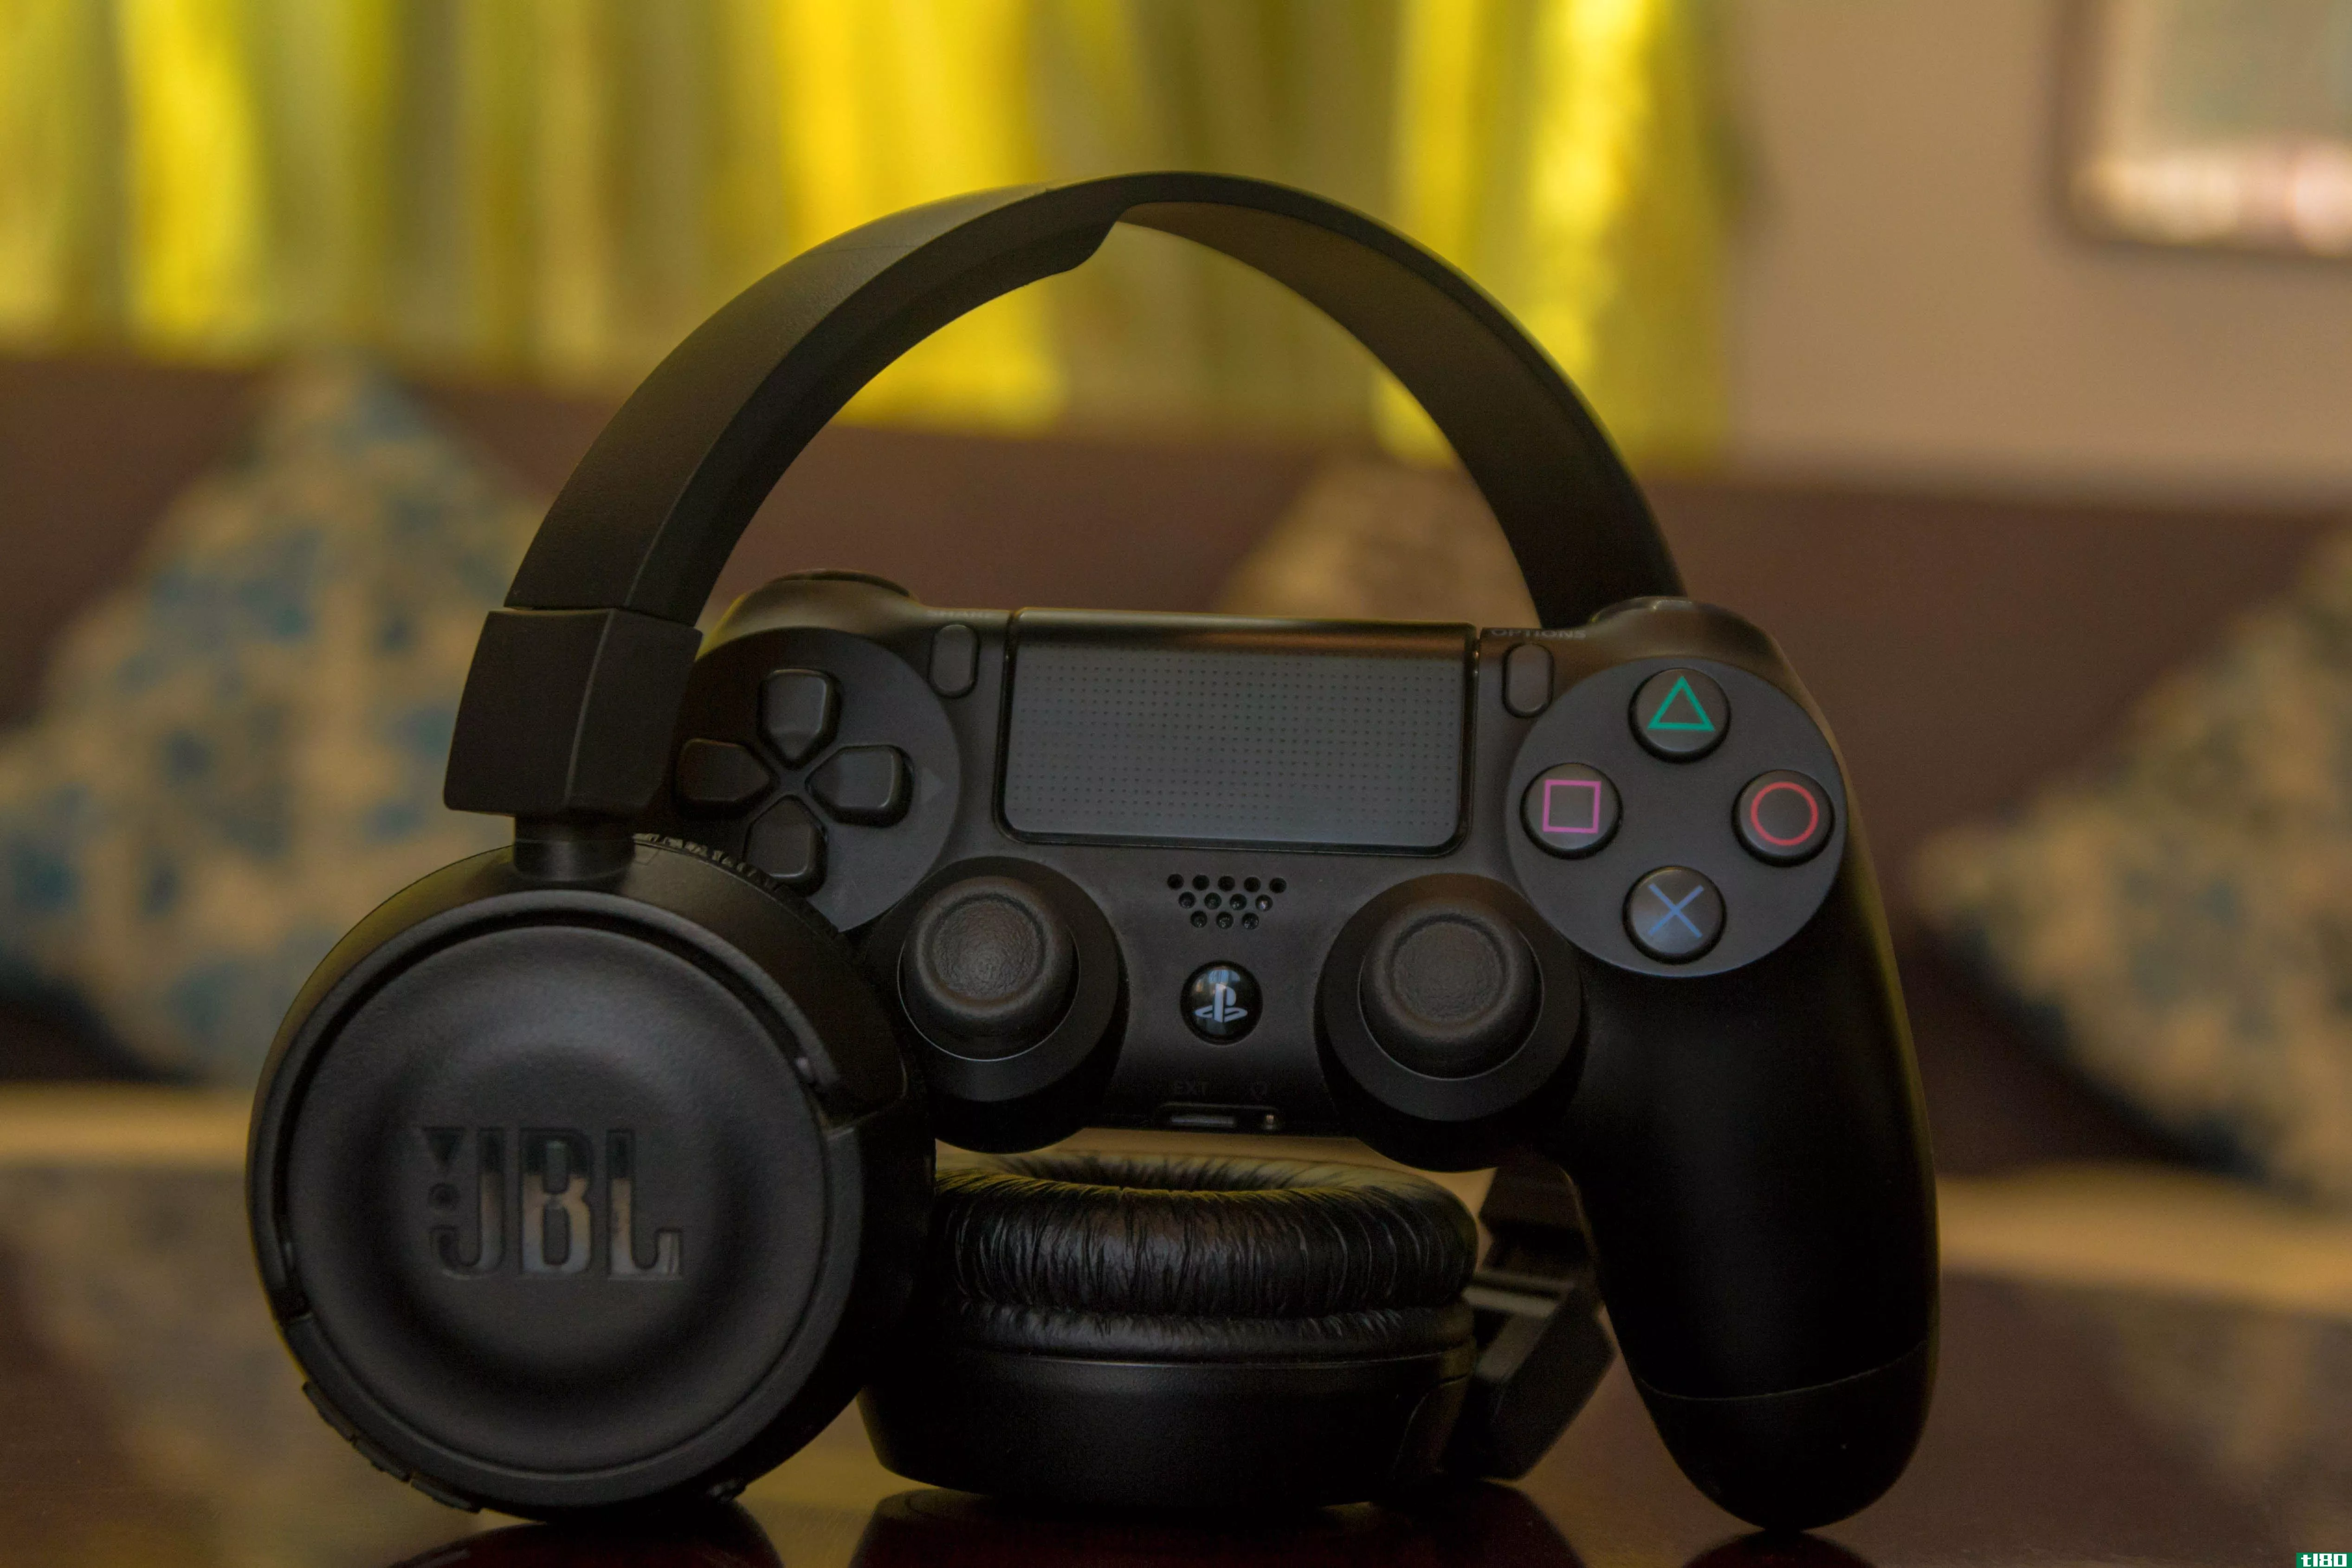 A bluetooth controller and gaming headset